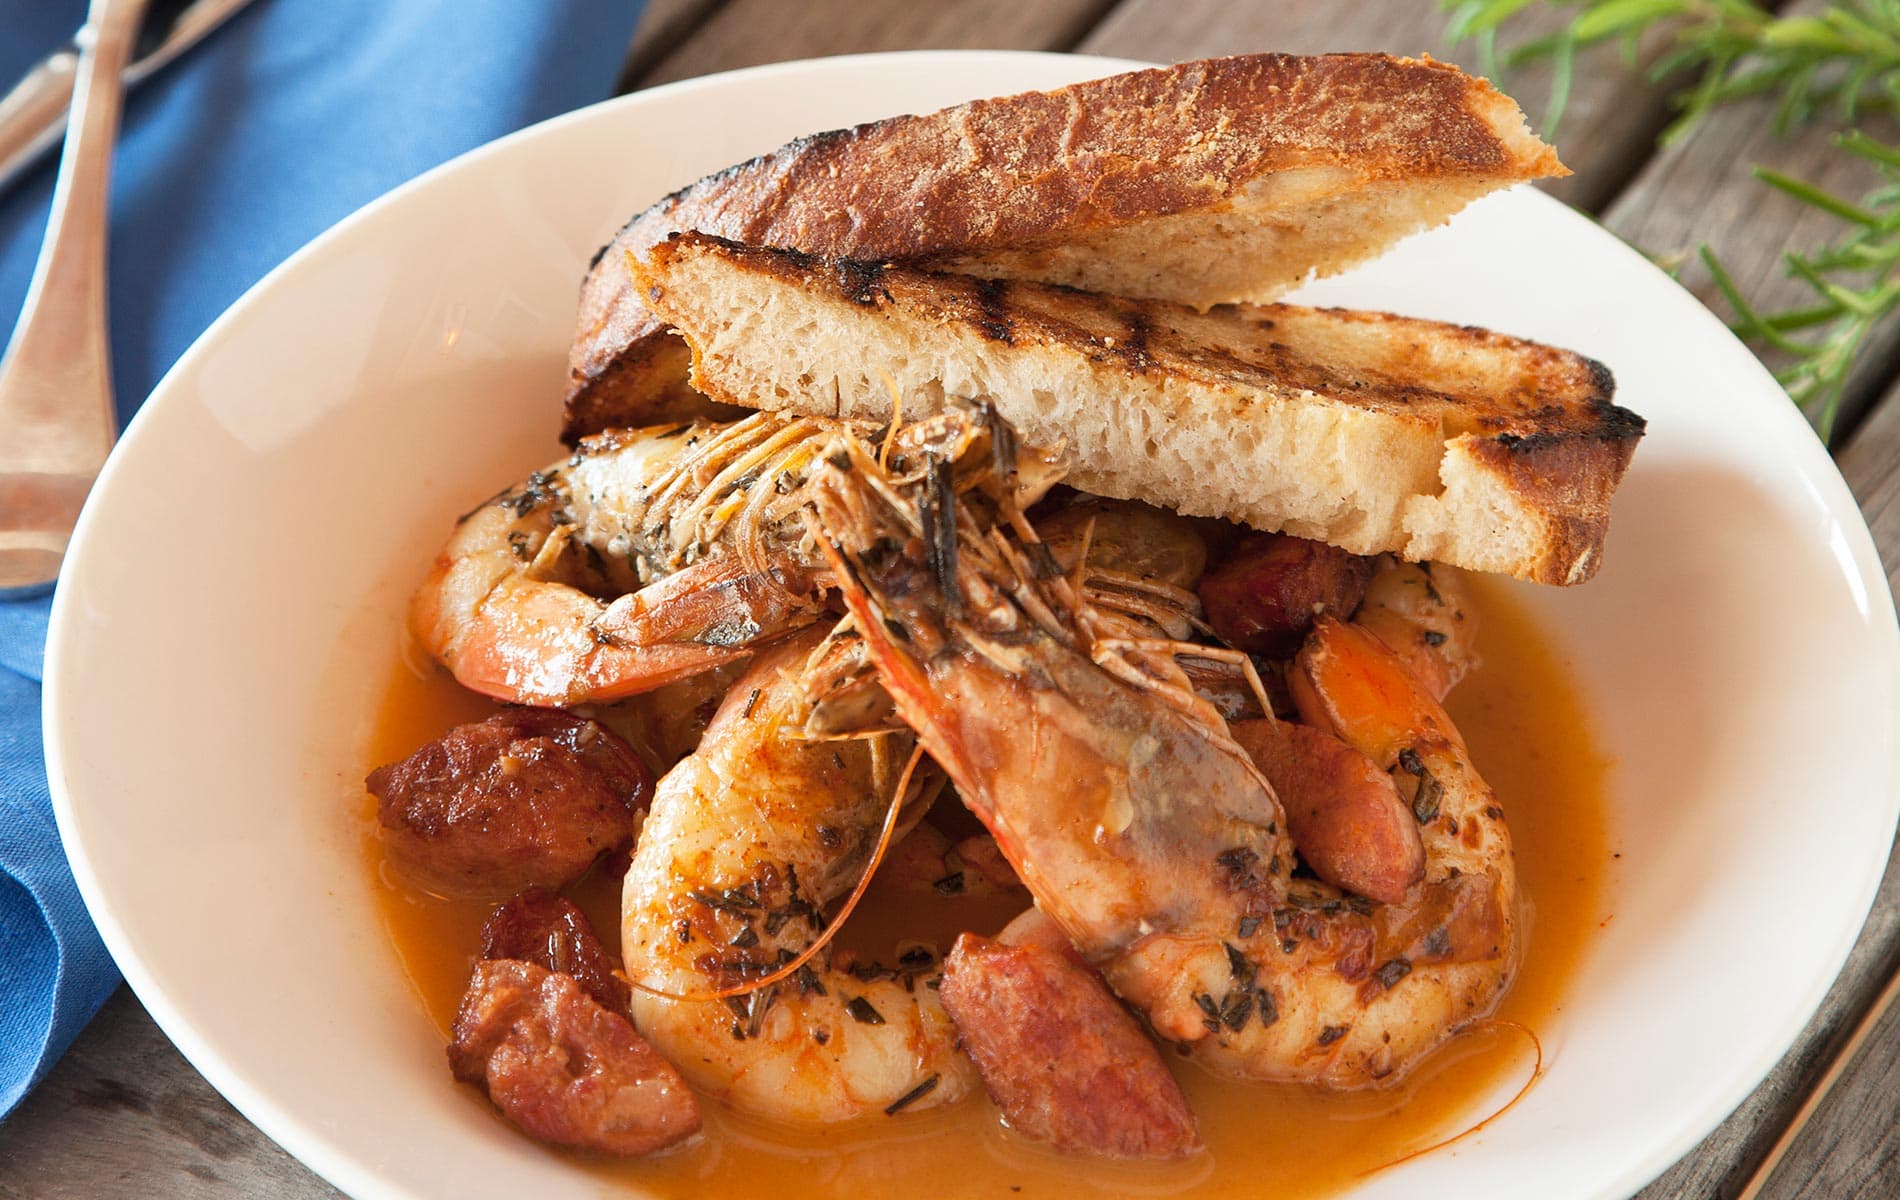 Barbecued Head-On Shrimp by Chef David Bishop at Bud & Alley’s Waterfront Restaurant in Seaside, Florida